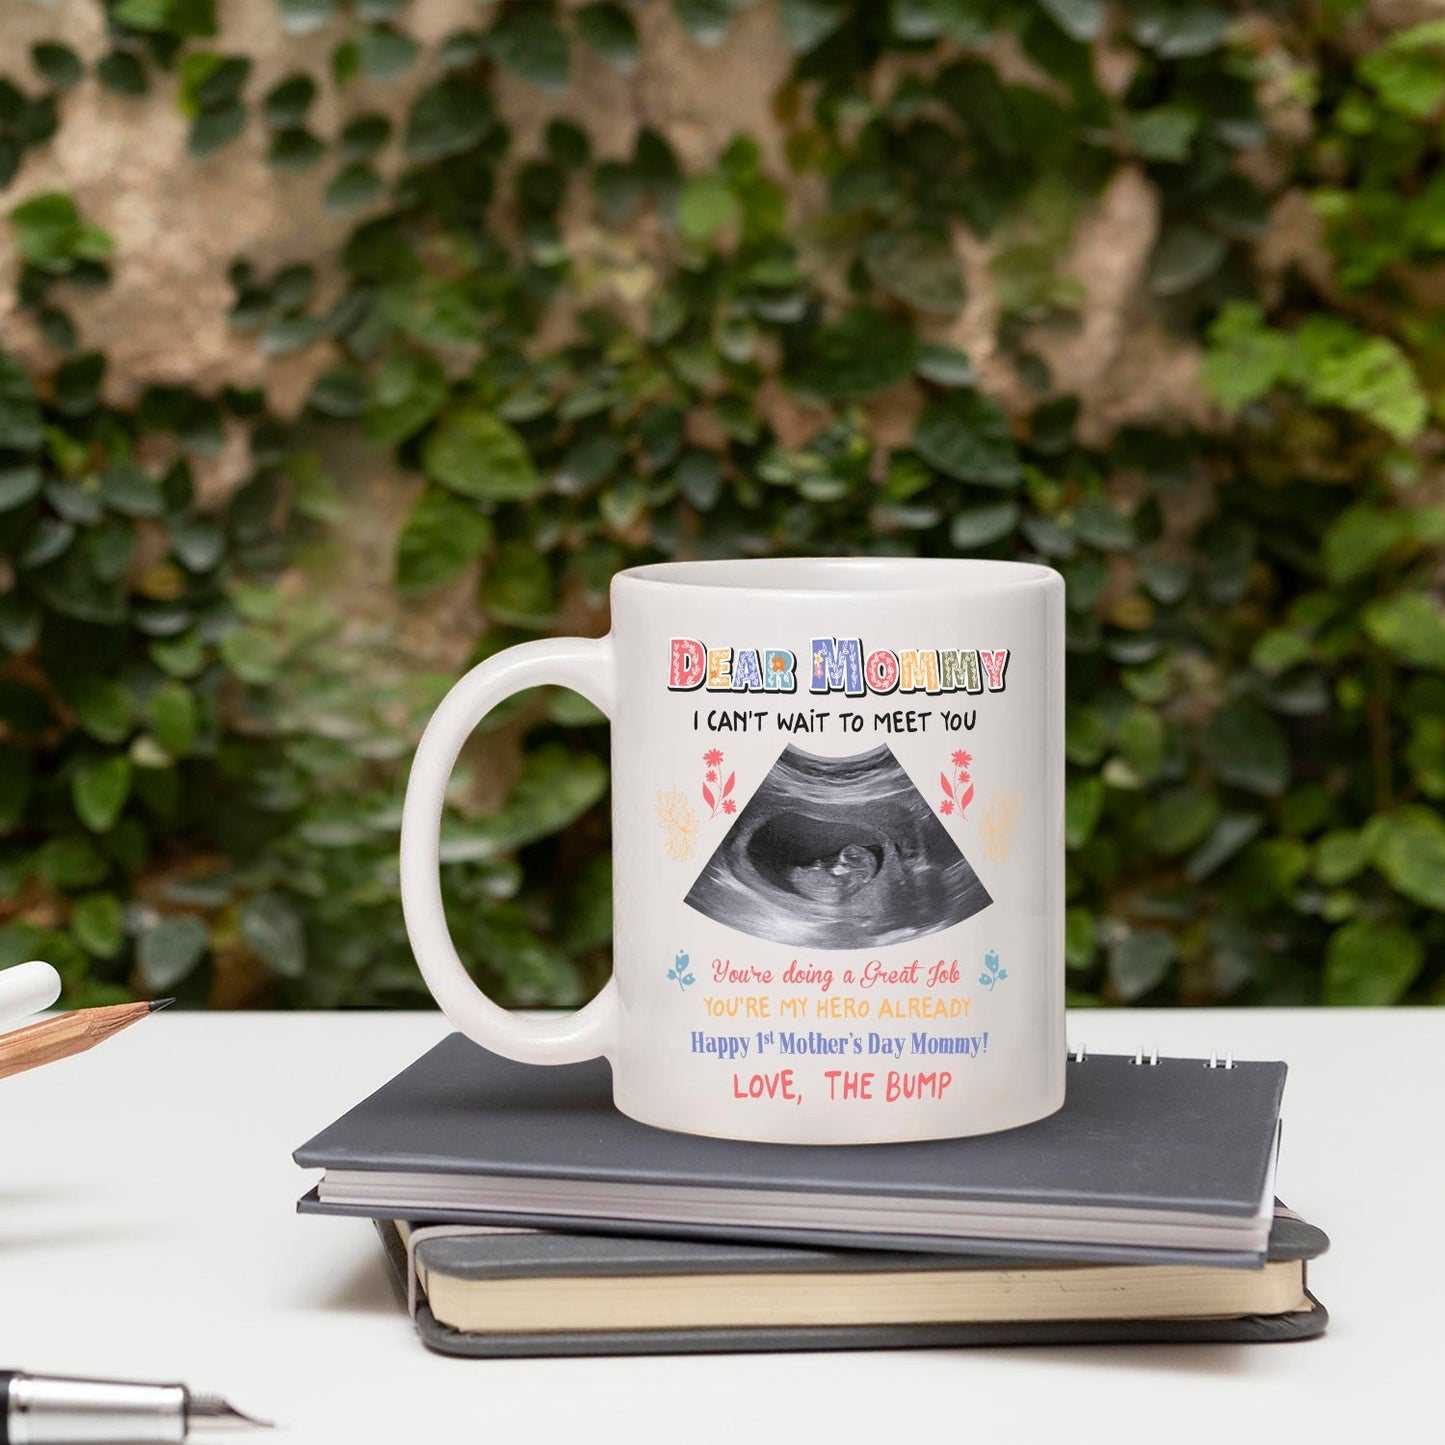 Dear mommy - Personalized Mother's Day gift for New Mom - Custom Mug - MyMindfulGifts